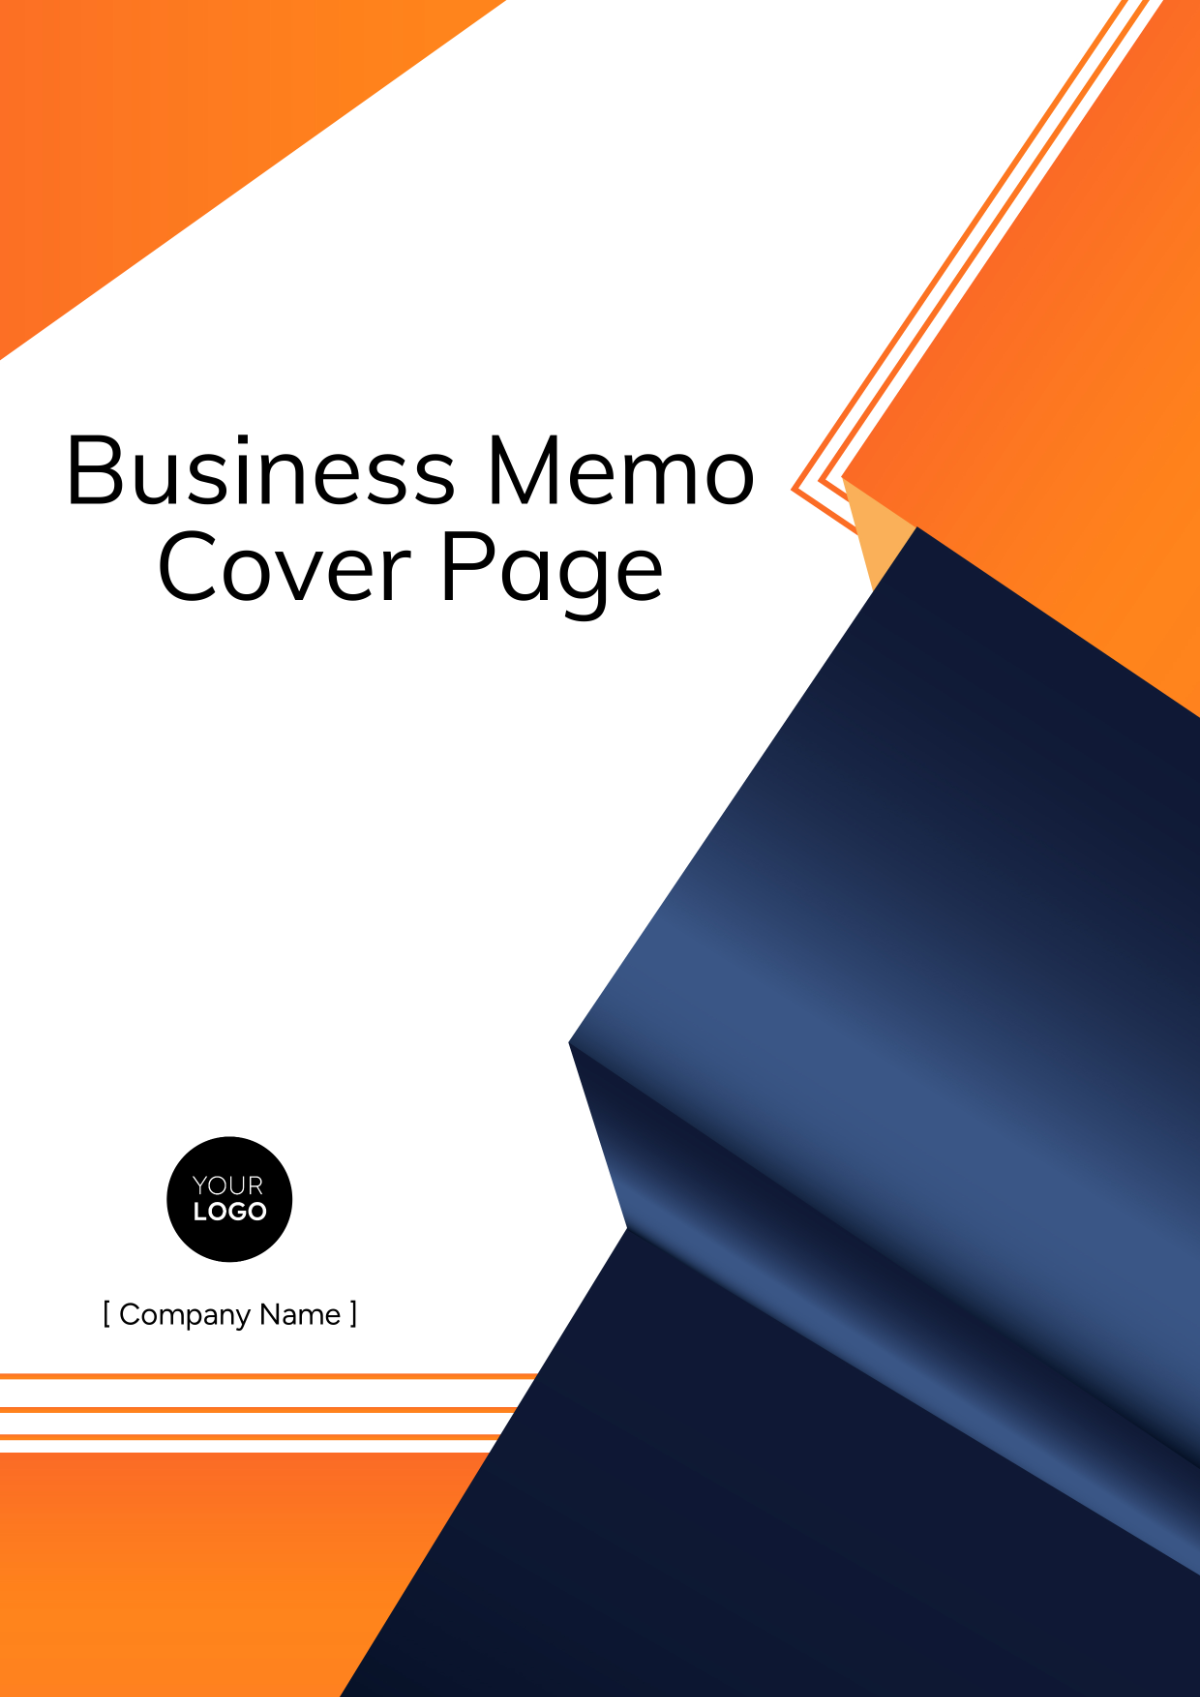 Business Memo Cover Page Template